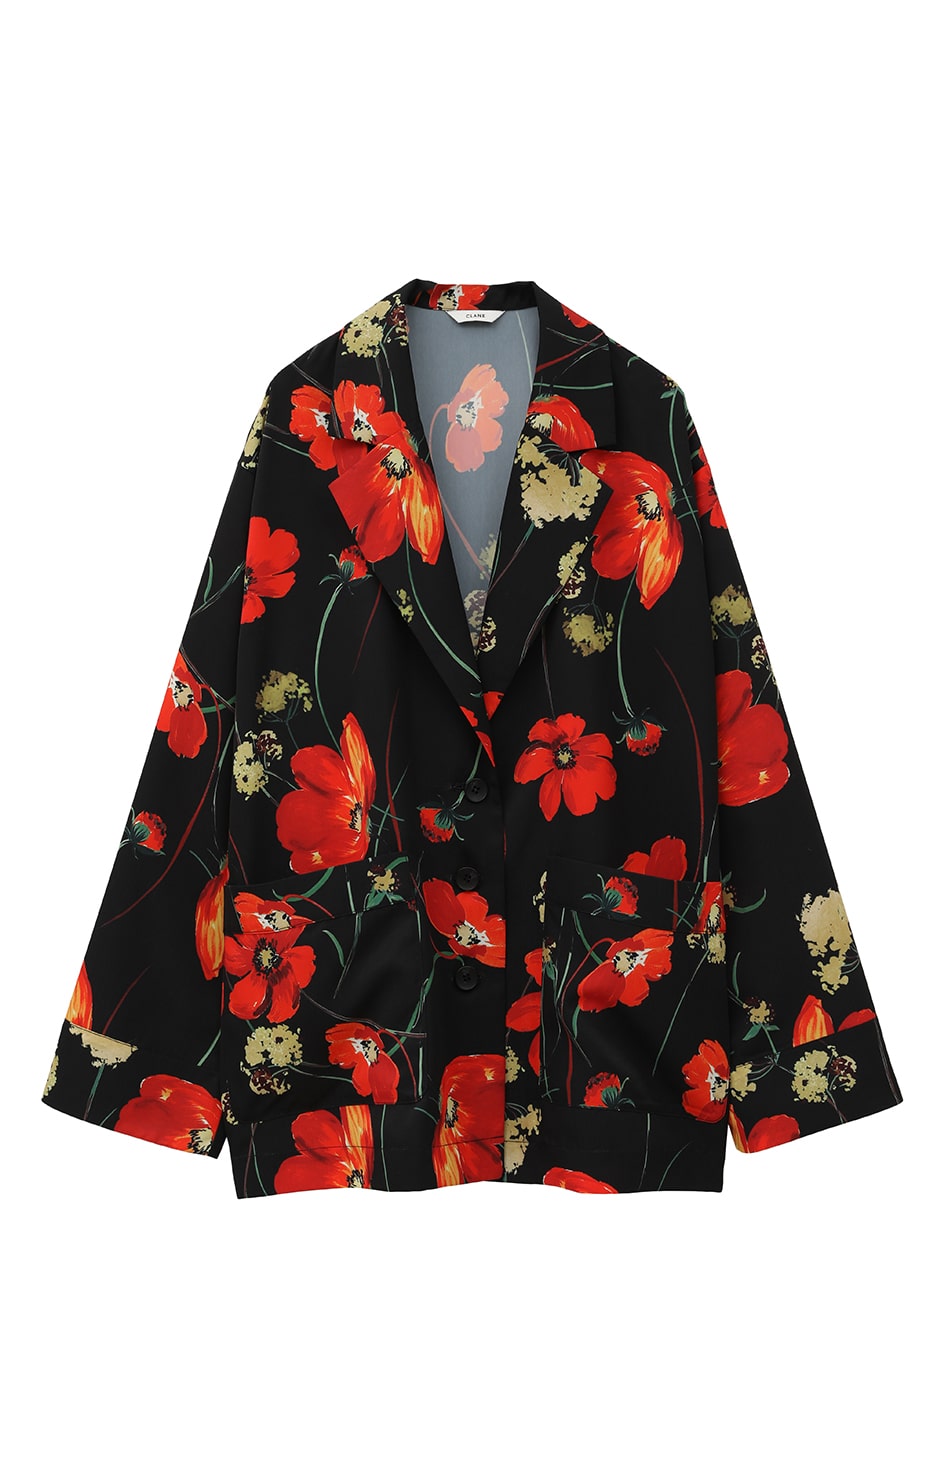 MULTICOLORED FLOWER SHIRT JACKET｜24AW EXHIBITION()｜CLANE 